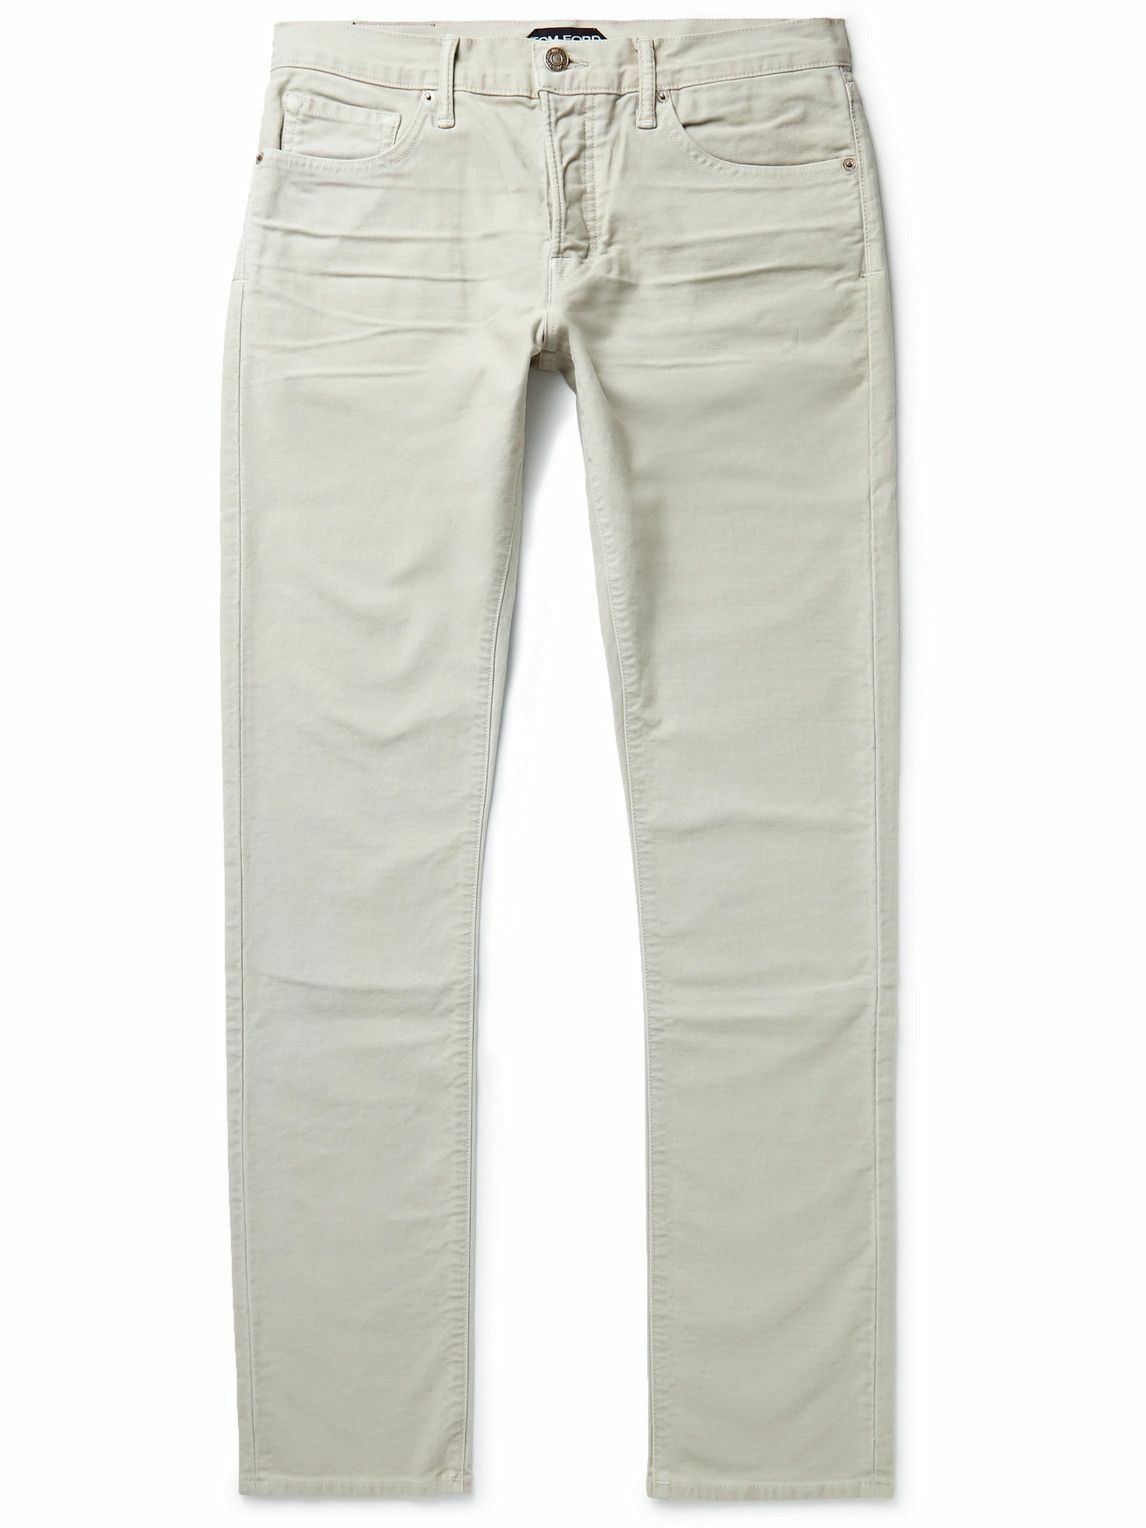 TOM FORD - Slim-Fit Garment-Dyed Stretch-Cotton Moleskin Trousers ...